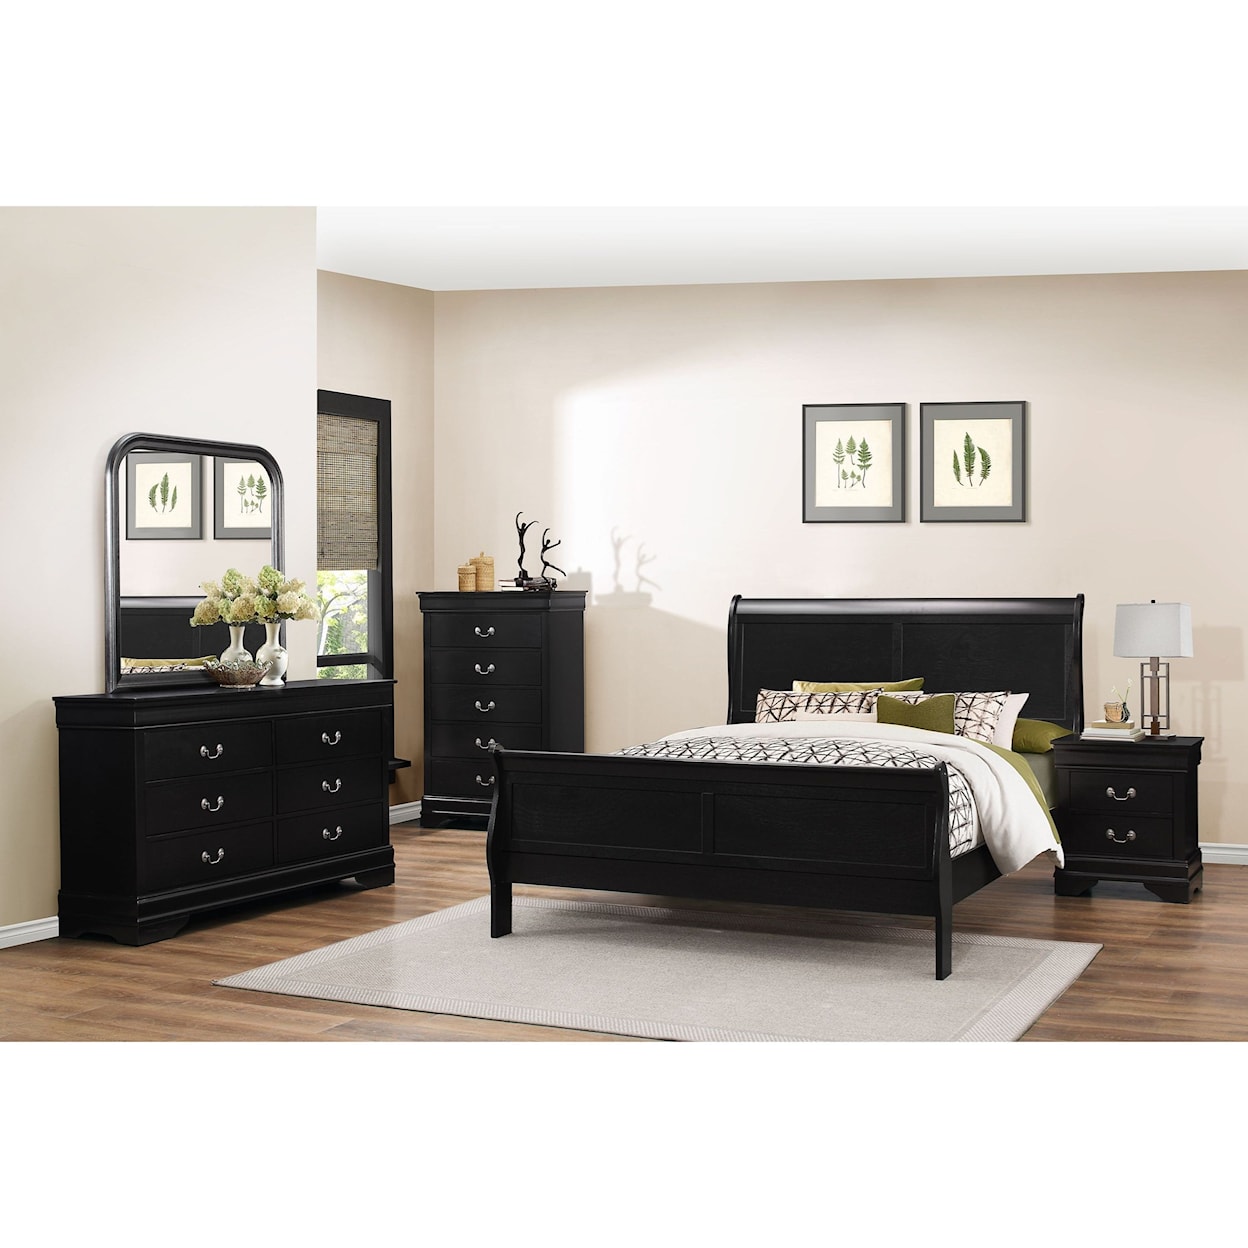 Lifestyle 4937 5 Piece Full Bedroom Set with Chest